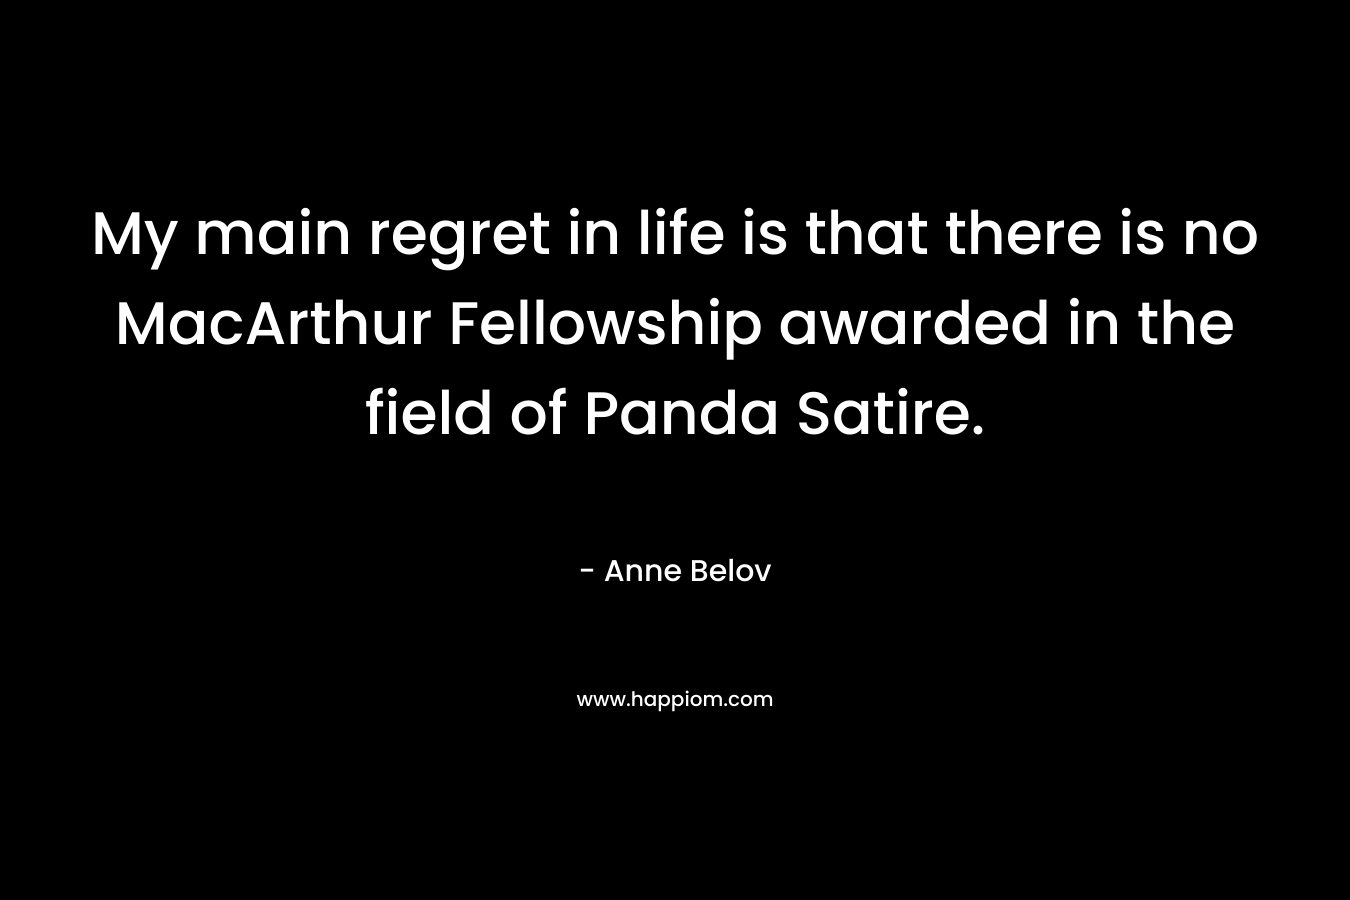 My main regret in life is that there is no MacArthur Fellowship awarded in the field of Panda Satire. – Anne Belov